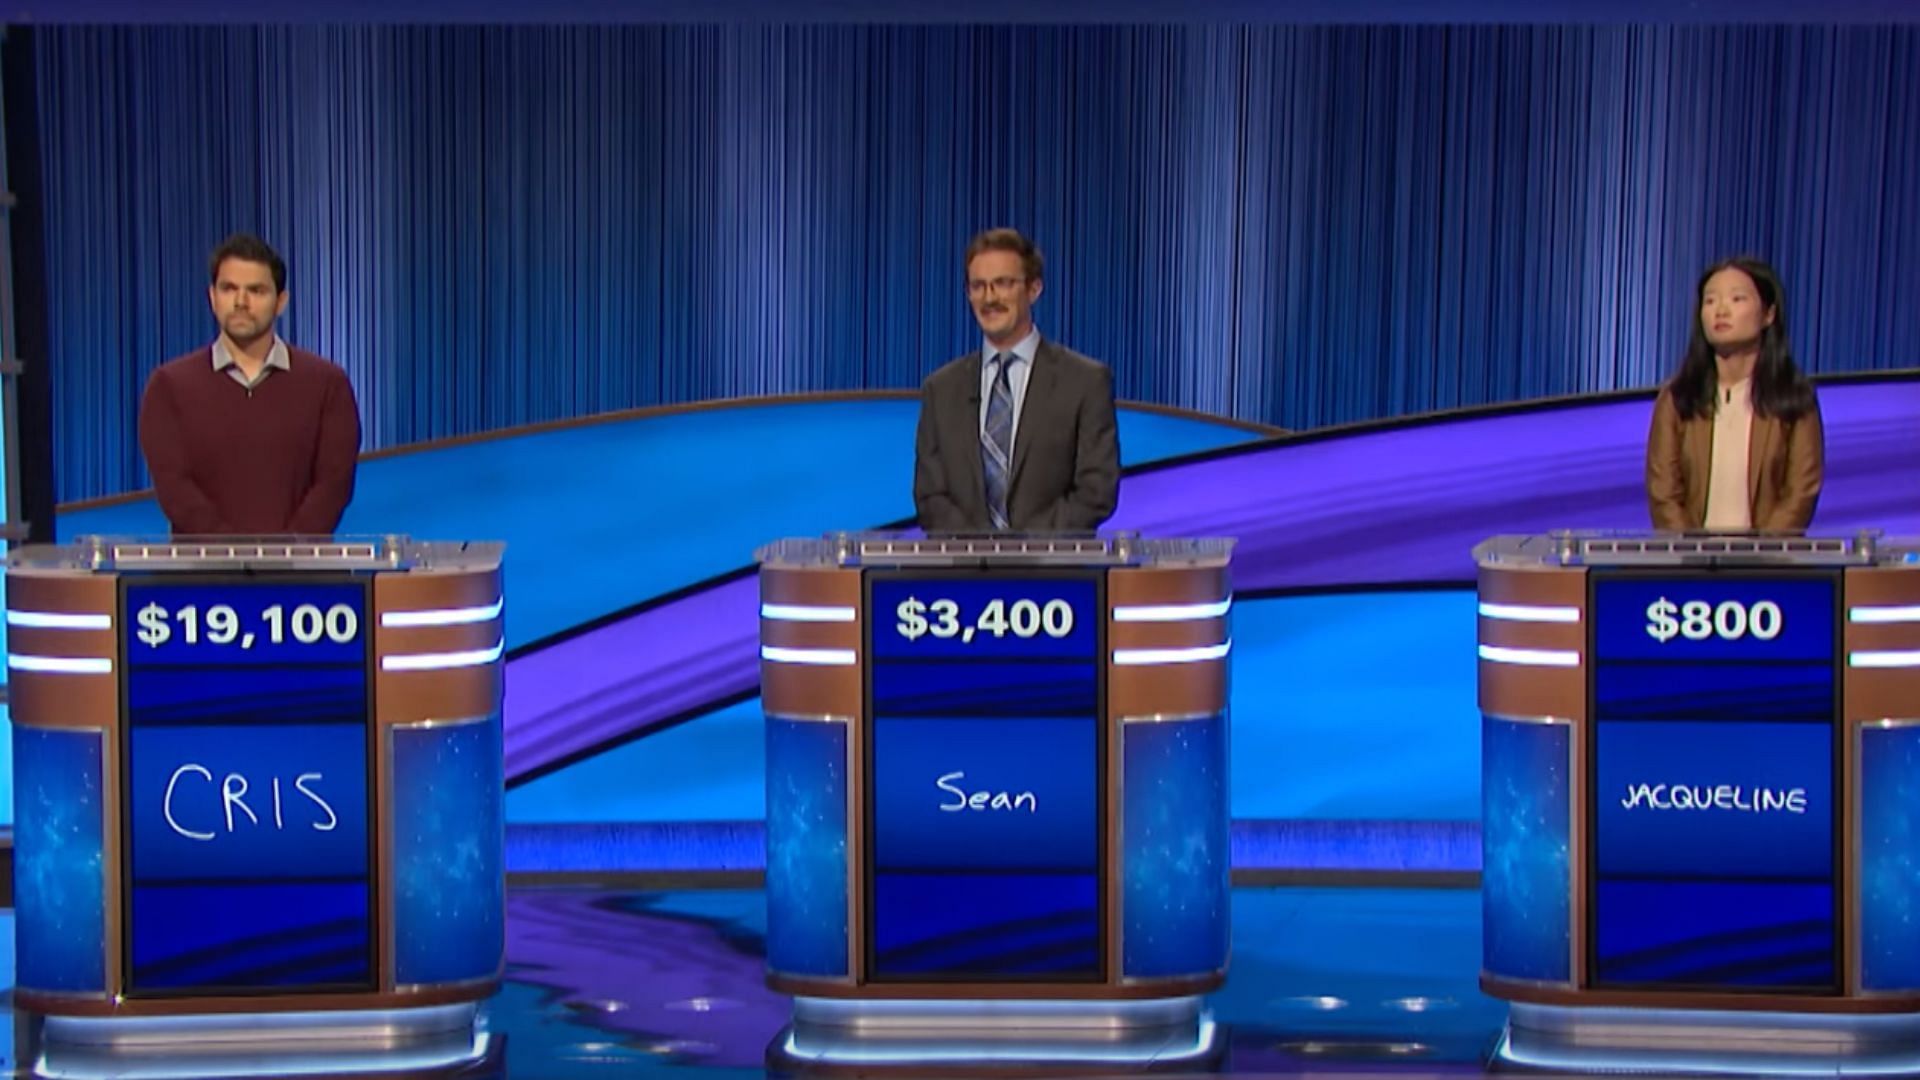 The game show consists of three players